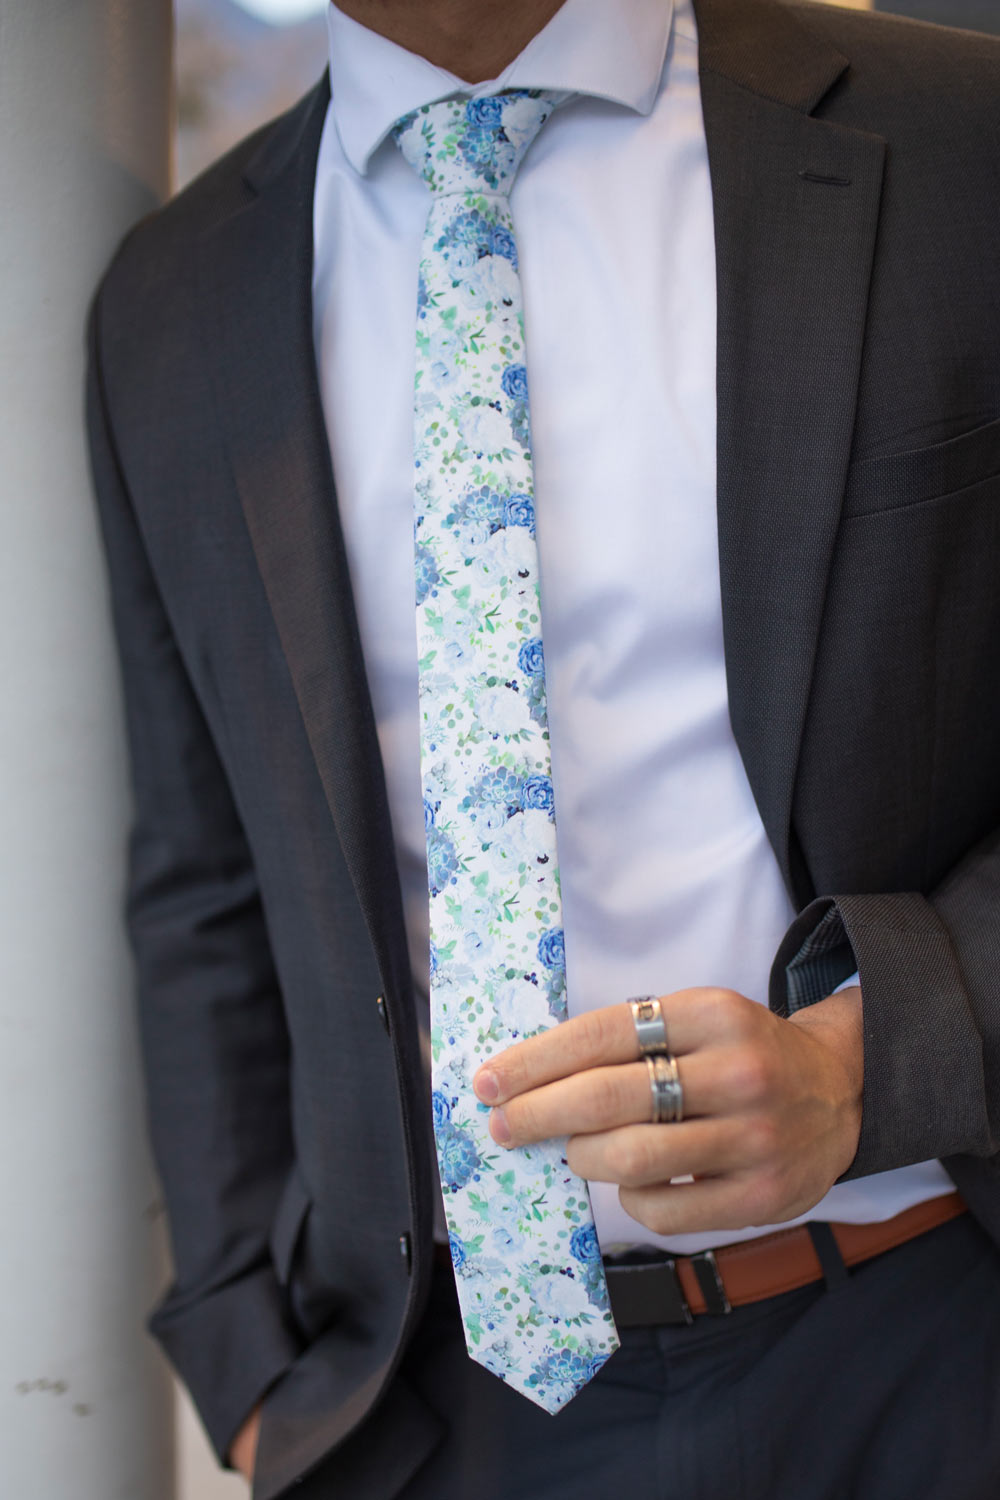 Arctic Ice tie worn with a white shirt and black suit.